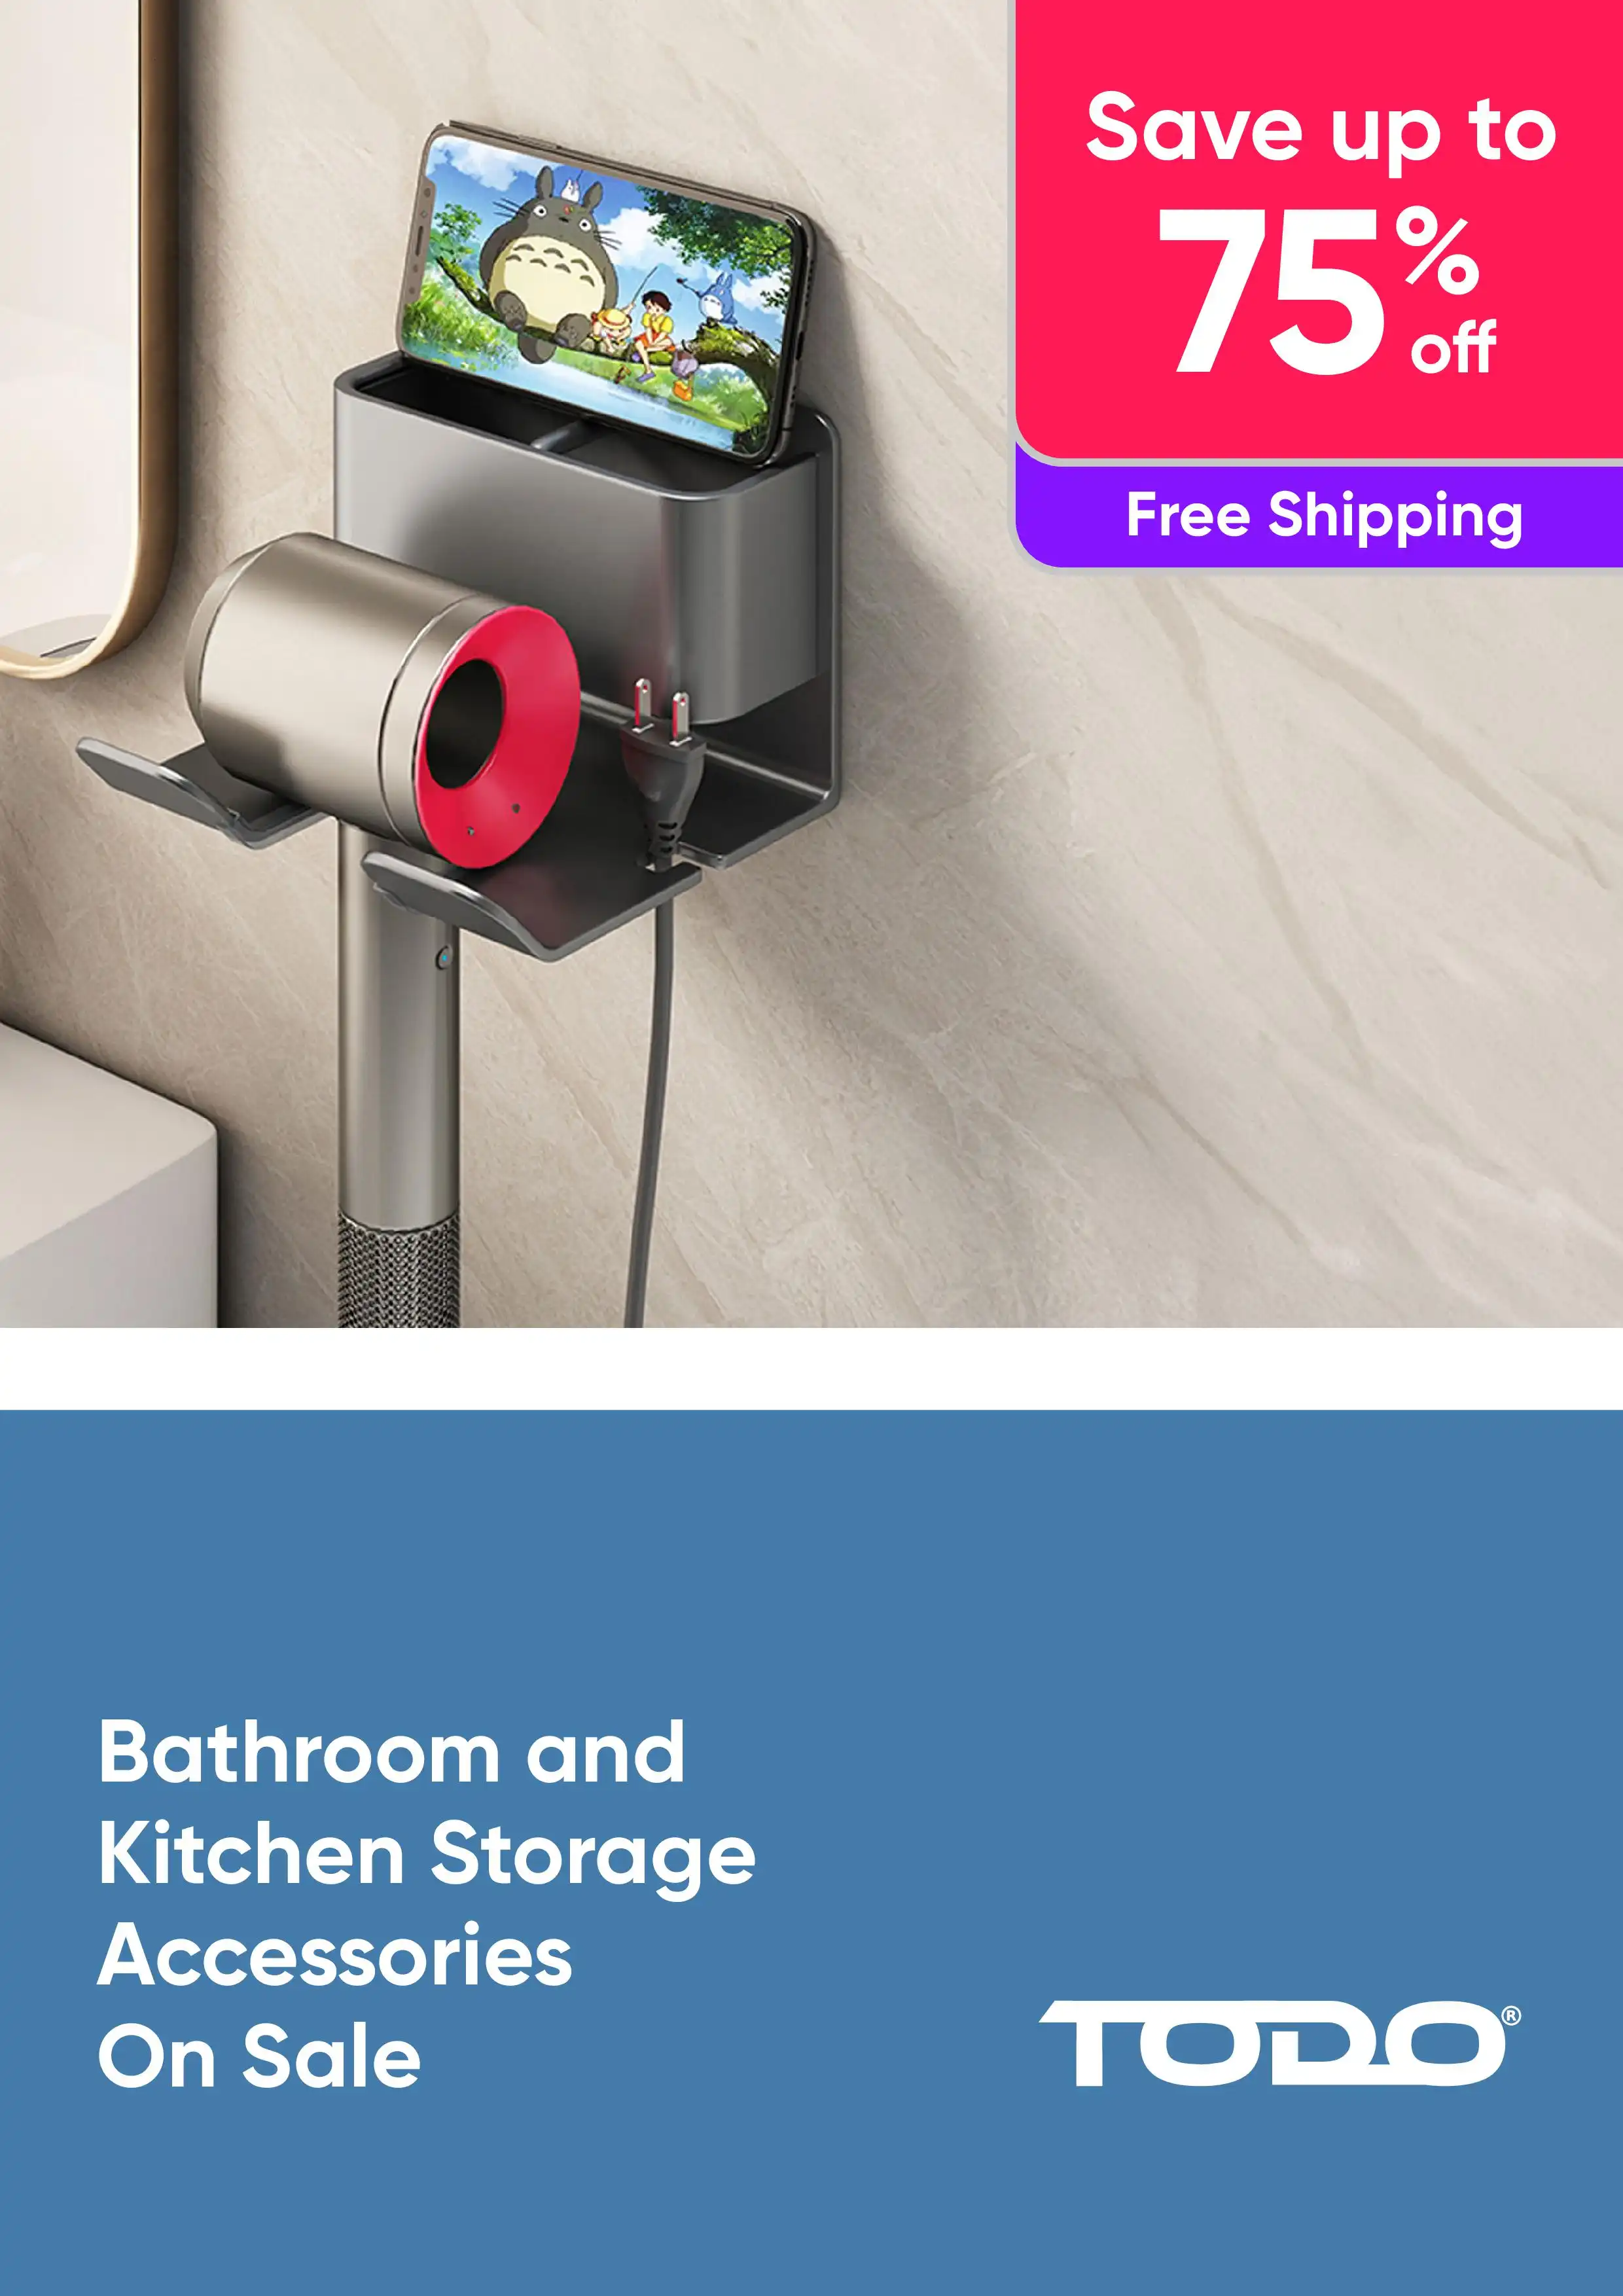 Bathroom and Kitchen Storage Accessories On Sale - Save Up To 75% Off RRP